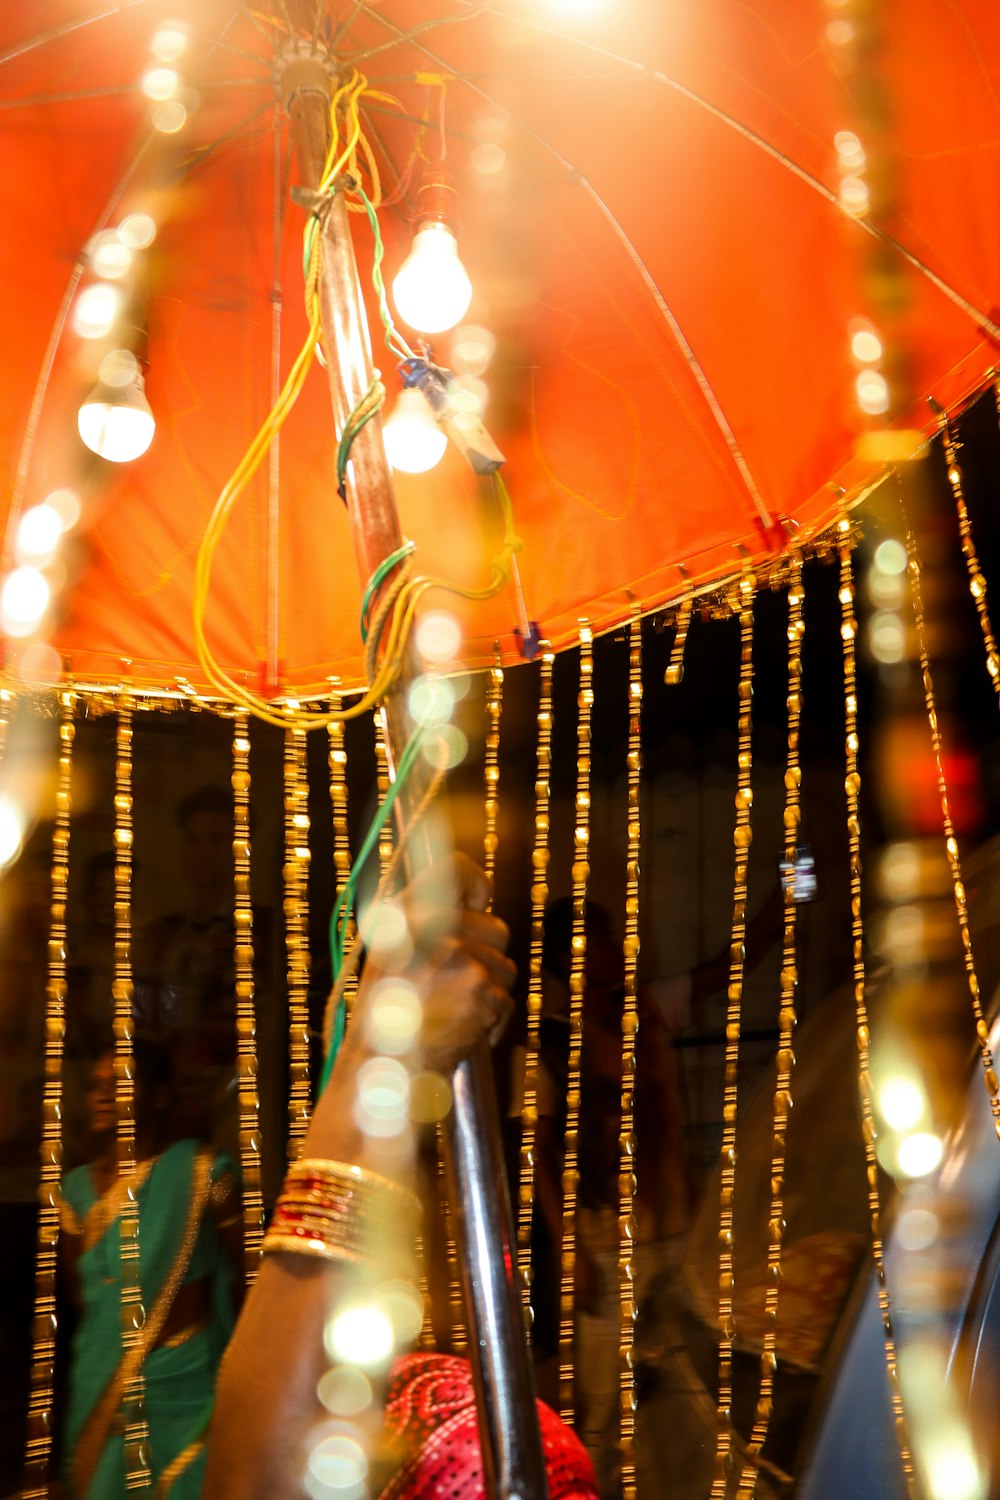 a person holding an umbrella in front of a string of lights